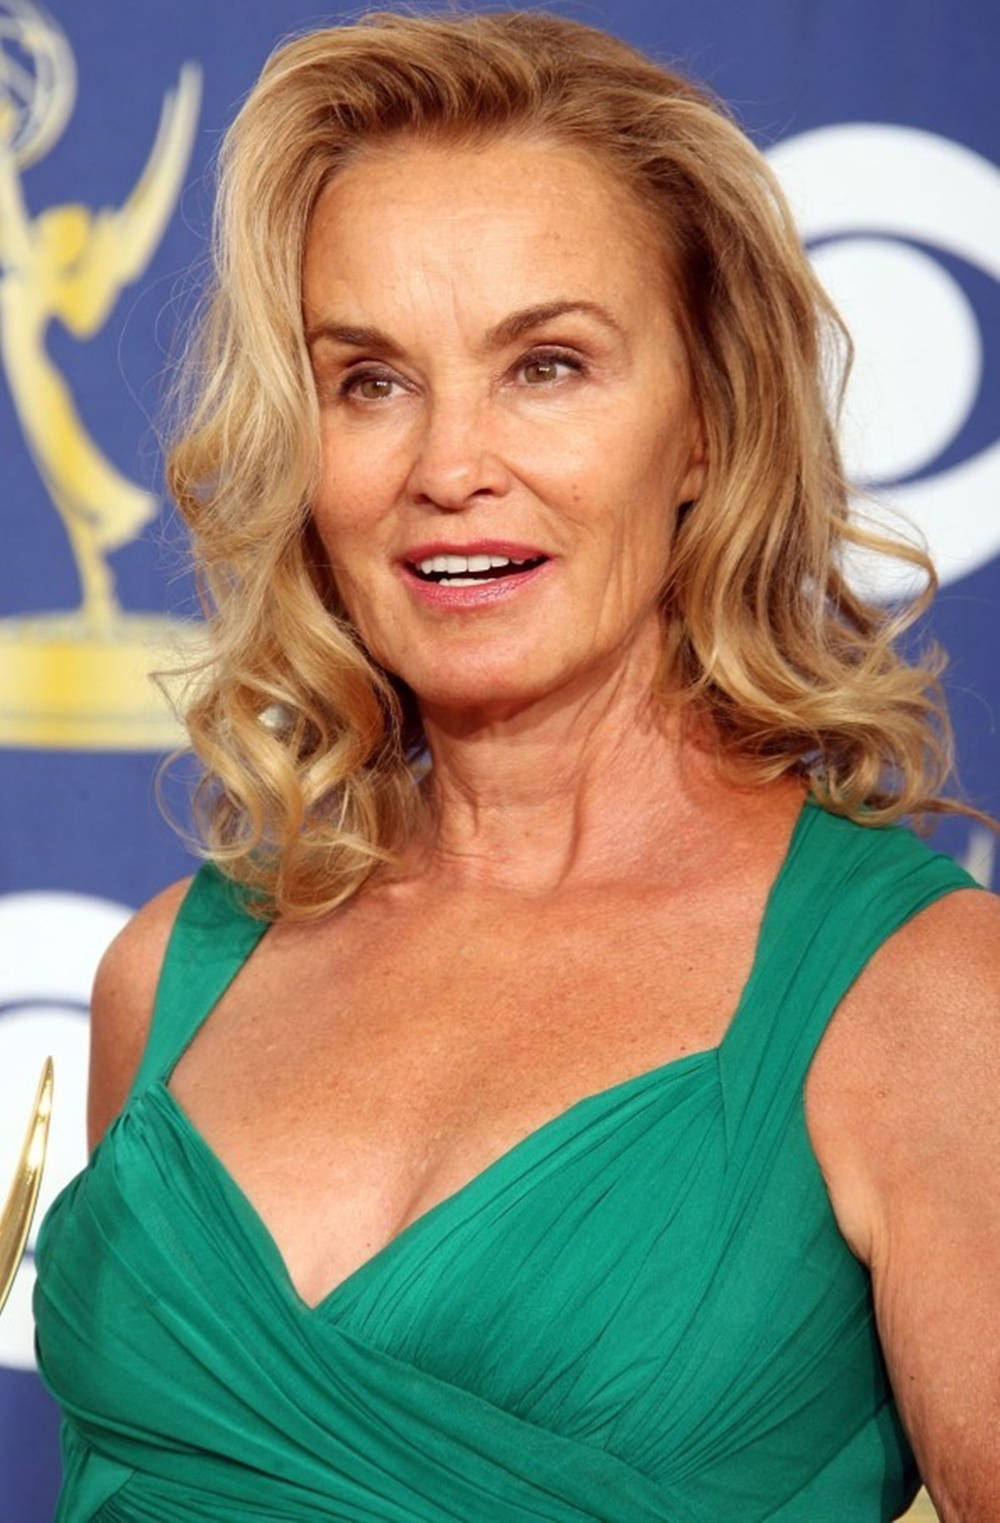 Jessicalange In Sexy Grünem Outfit Wallpaper